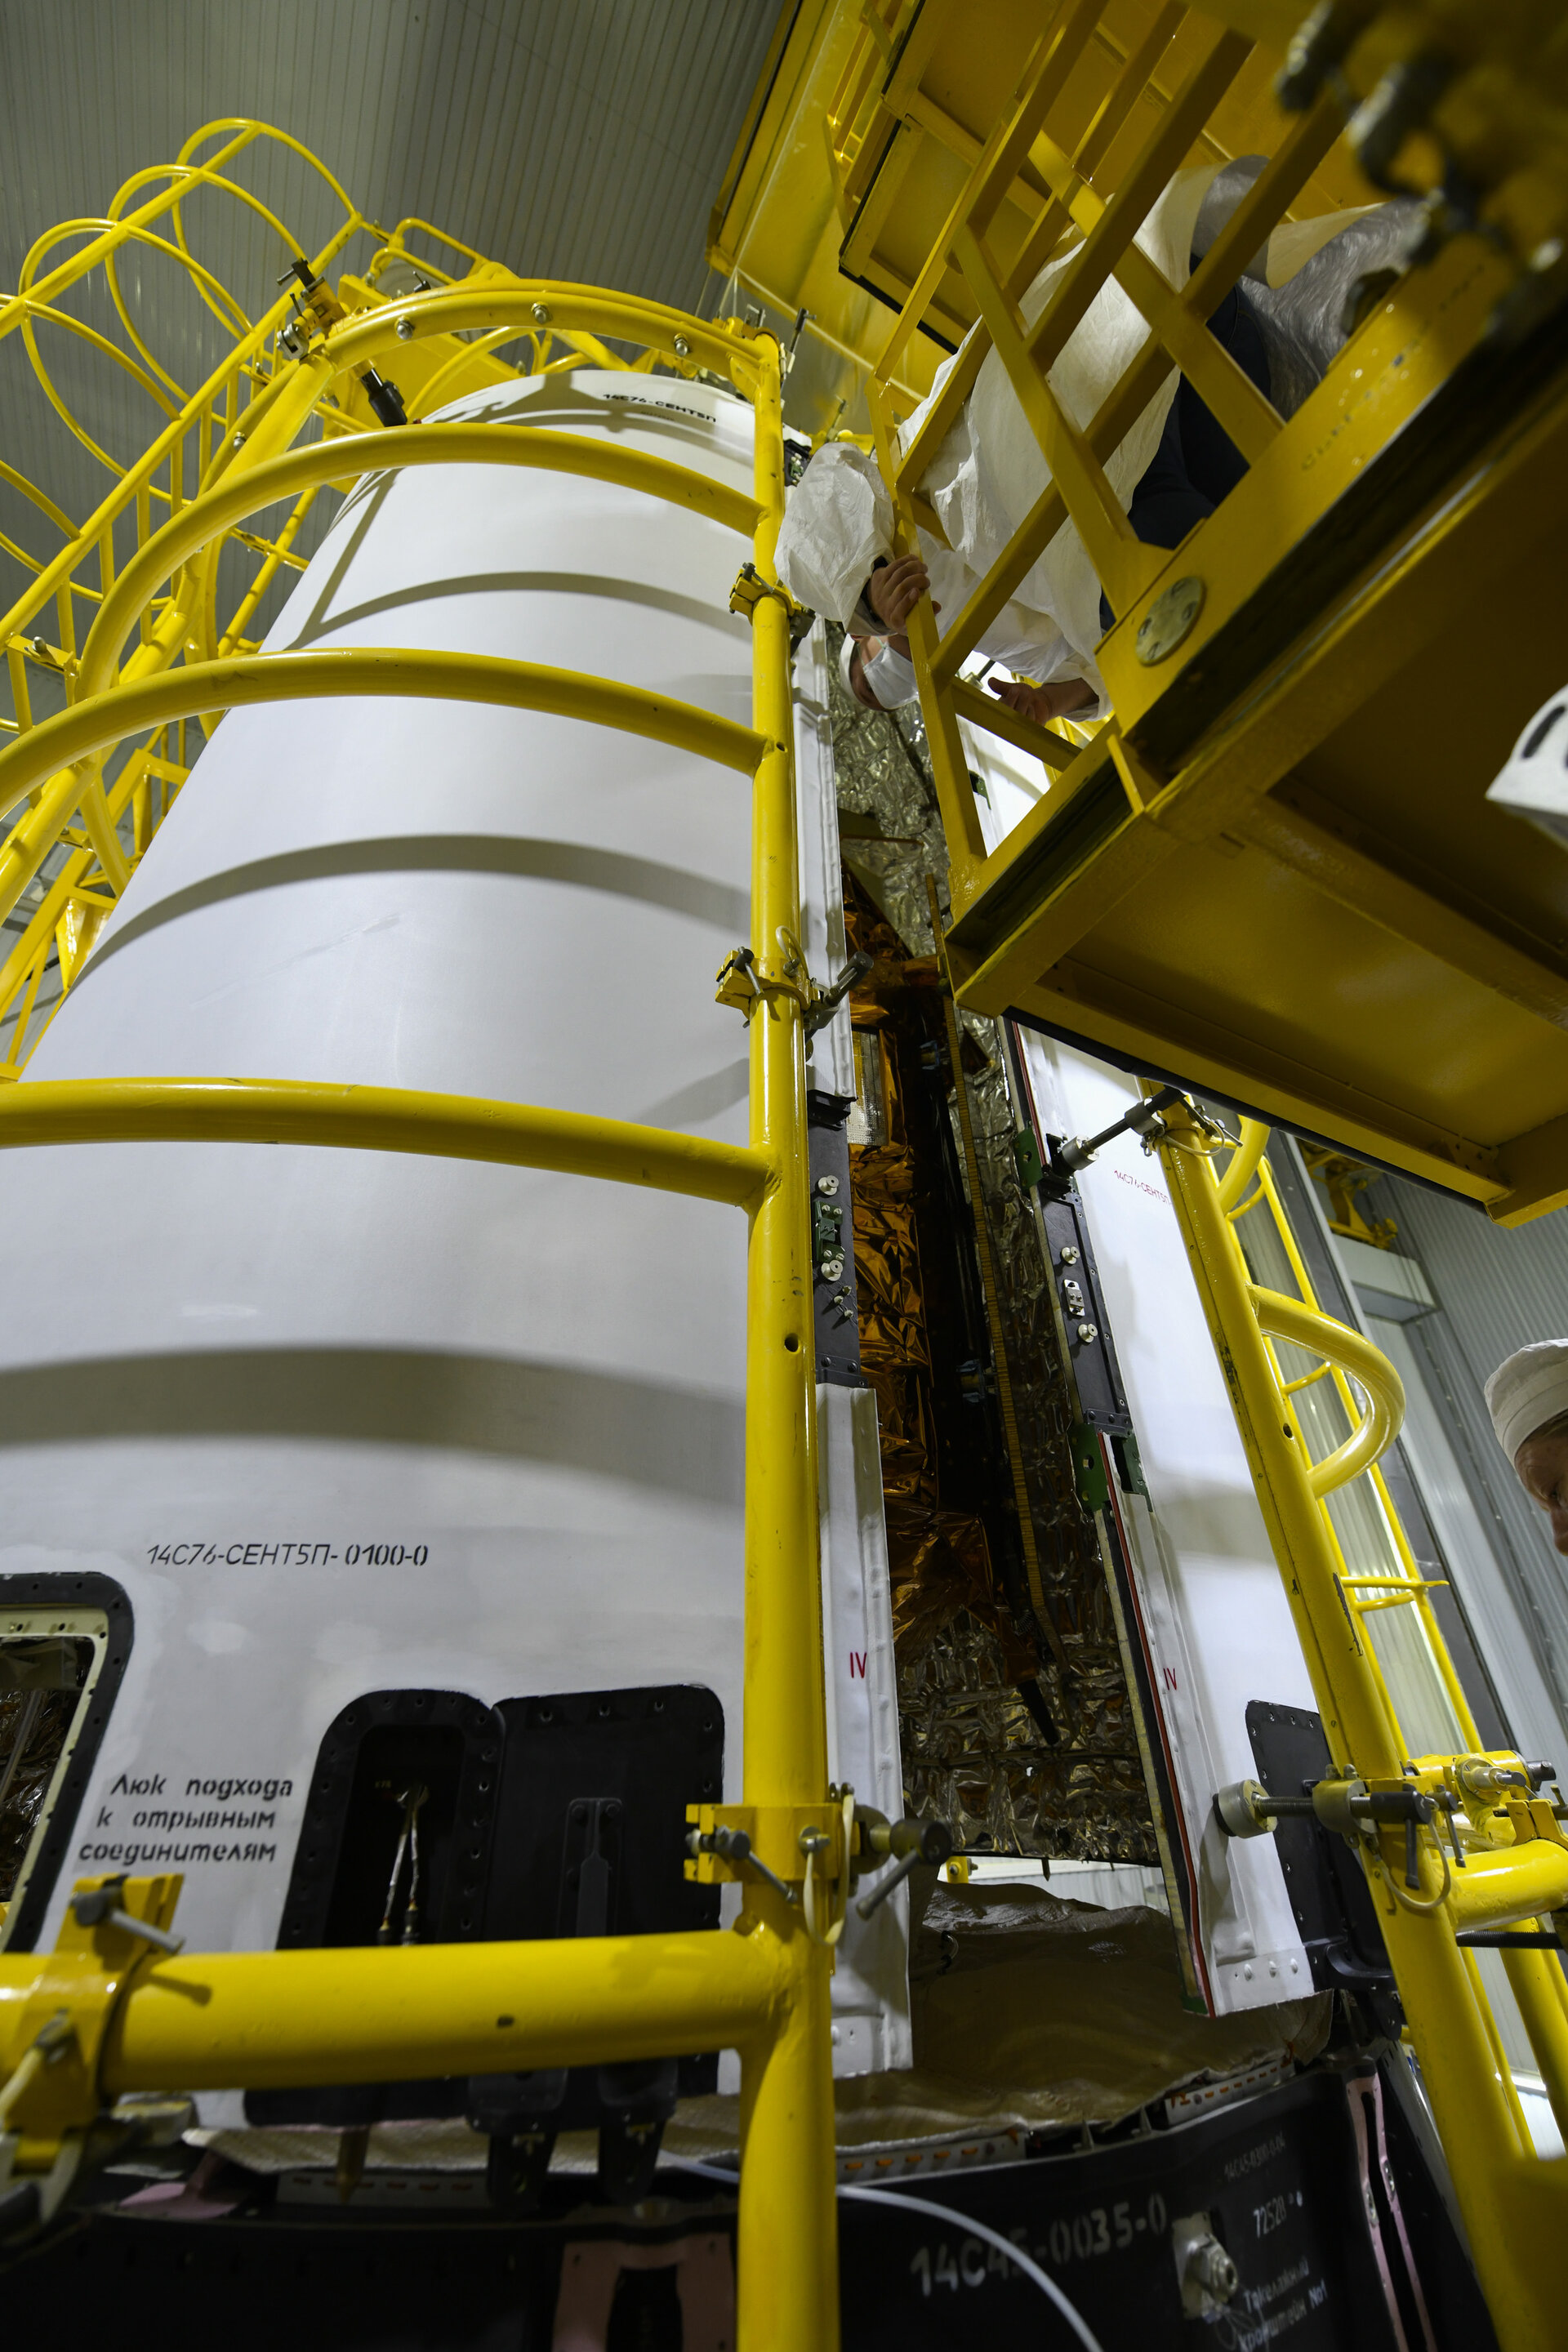 Encapsulation of Sentinel-5P within the launcher fairing